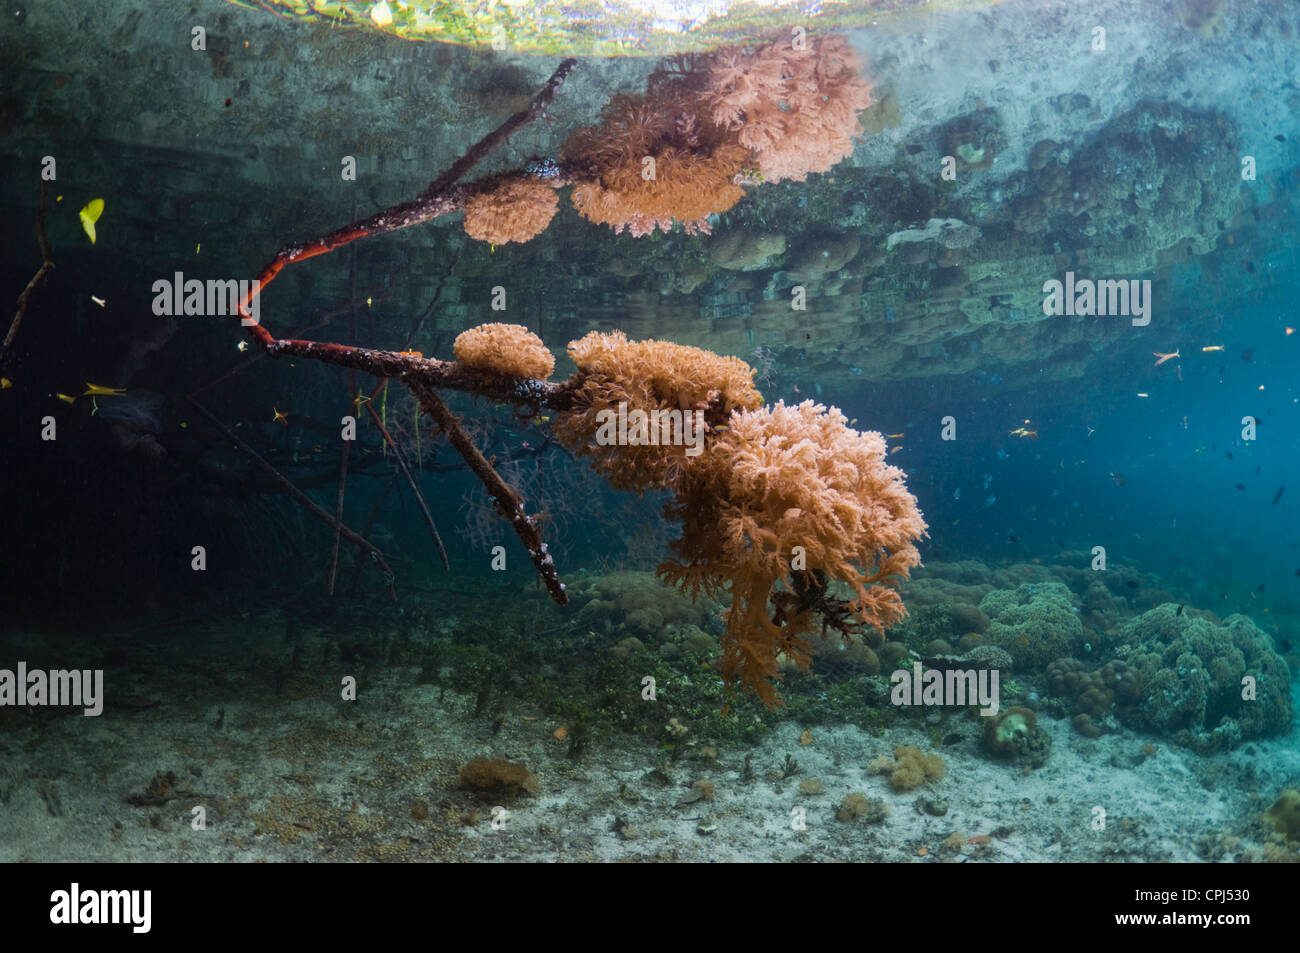 Blue water mangrove next to coral reef. Soft coral growing on mangrove root. Raja Ampat, West Papua, Indonesia. Stock Photo